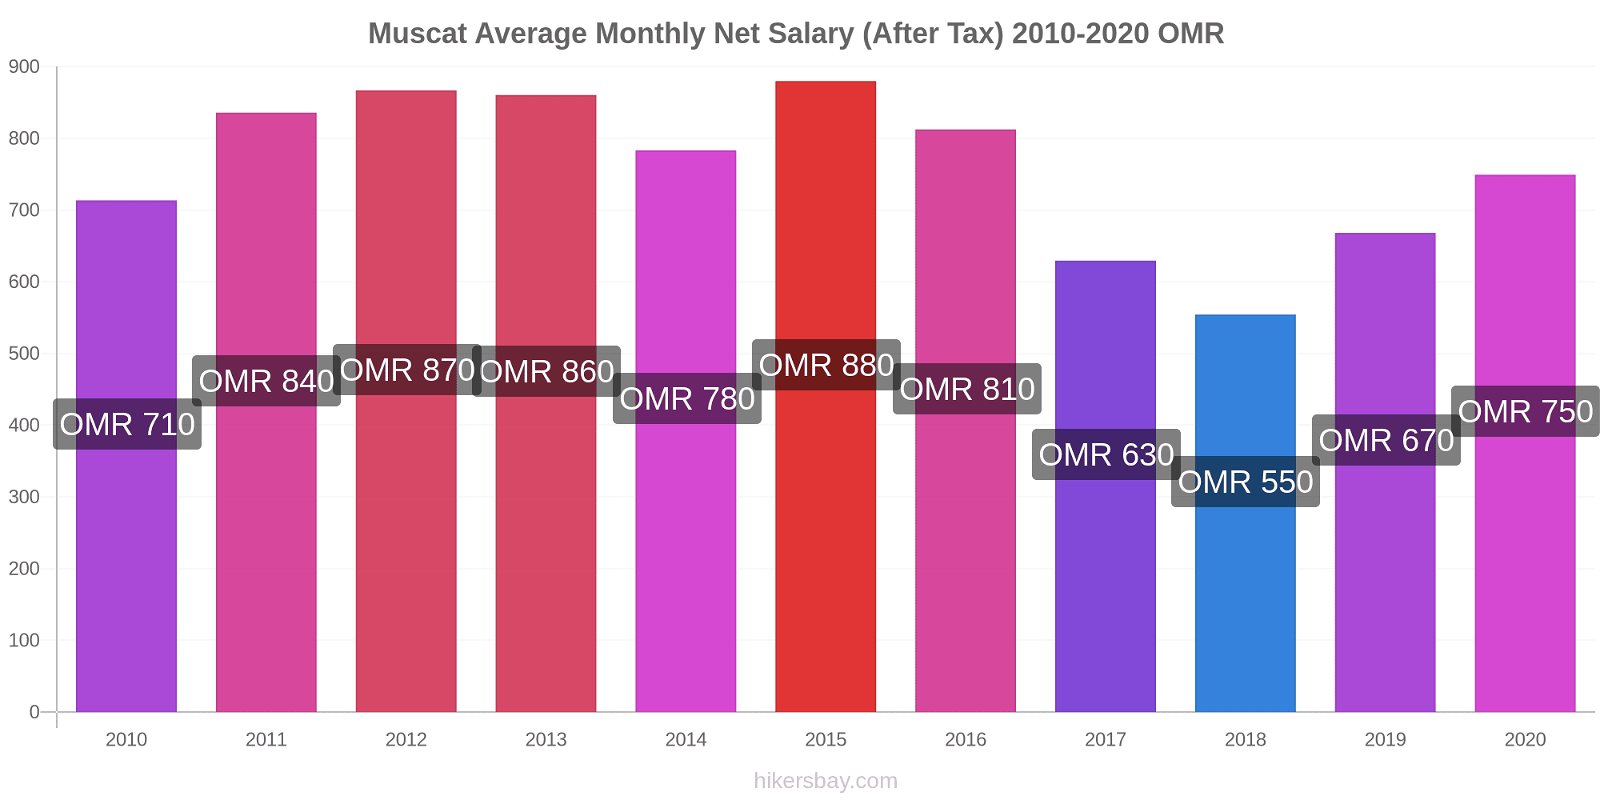 Muscat price changes Average Monthly Net Salary (After Tax) hikersbay.com